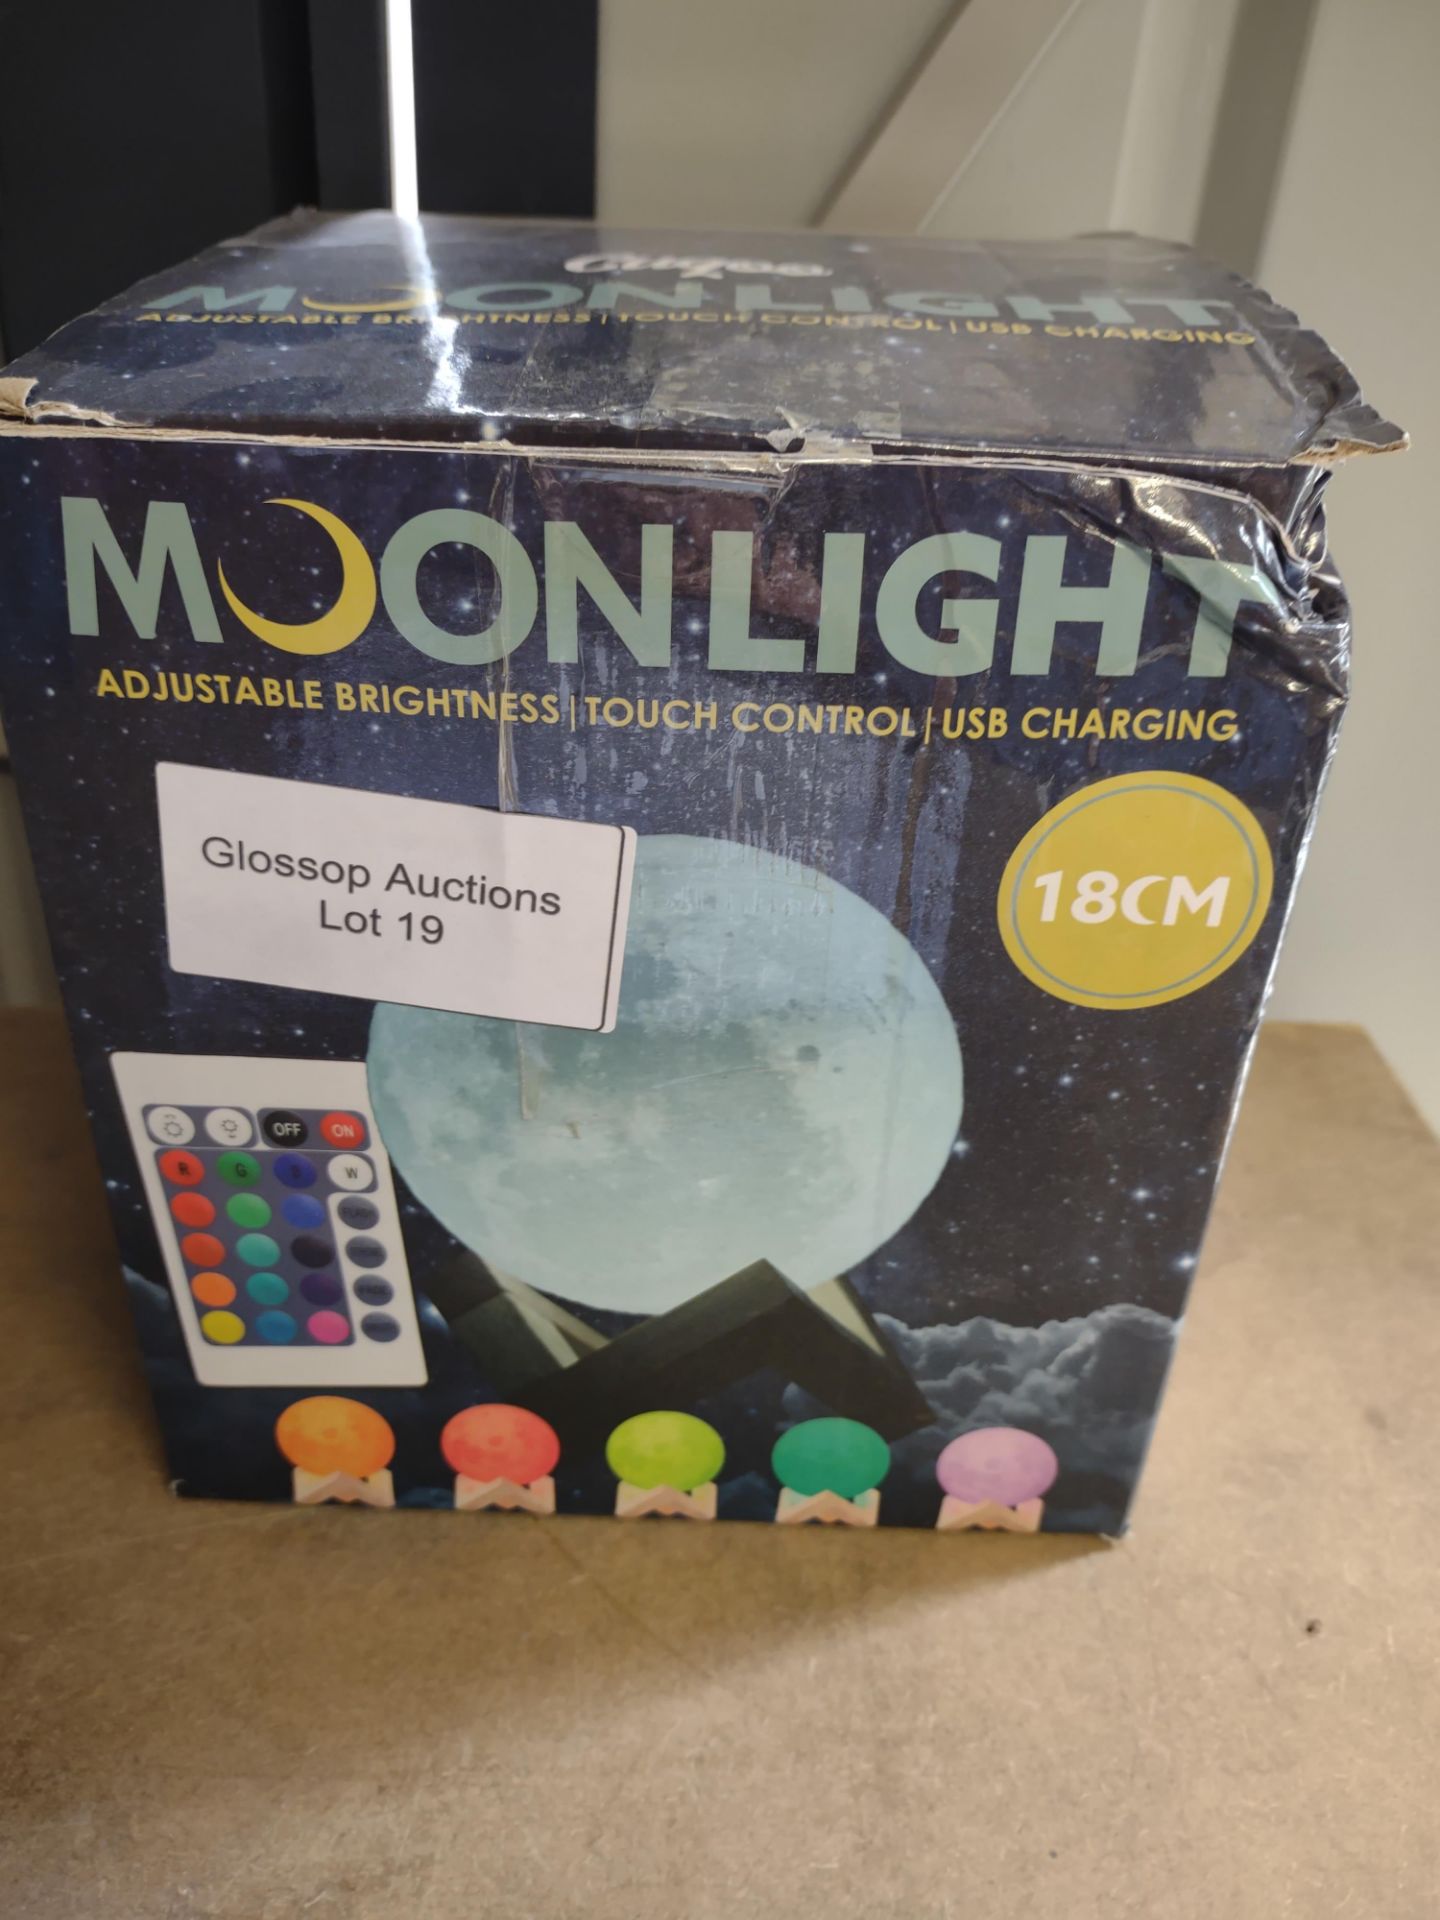 Moonlight 18cm color and dimmable. RRP £19.99 - GRADE U Moonlight 18cm color and dimmable.RRP £19.99 - Image 3 of 3